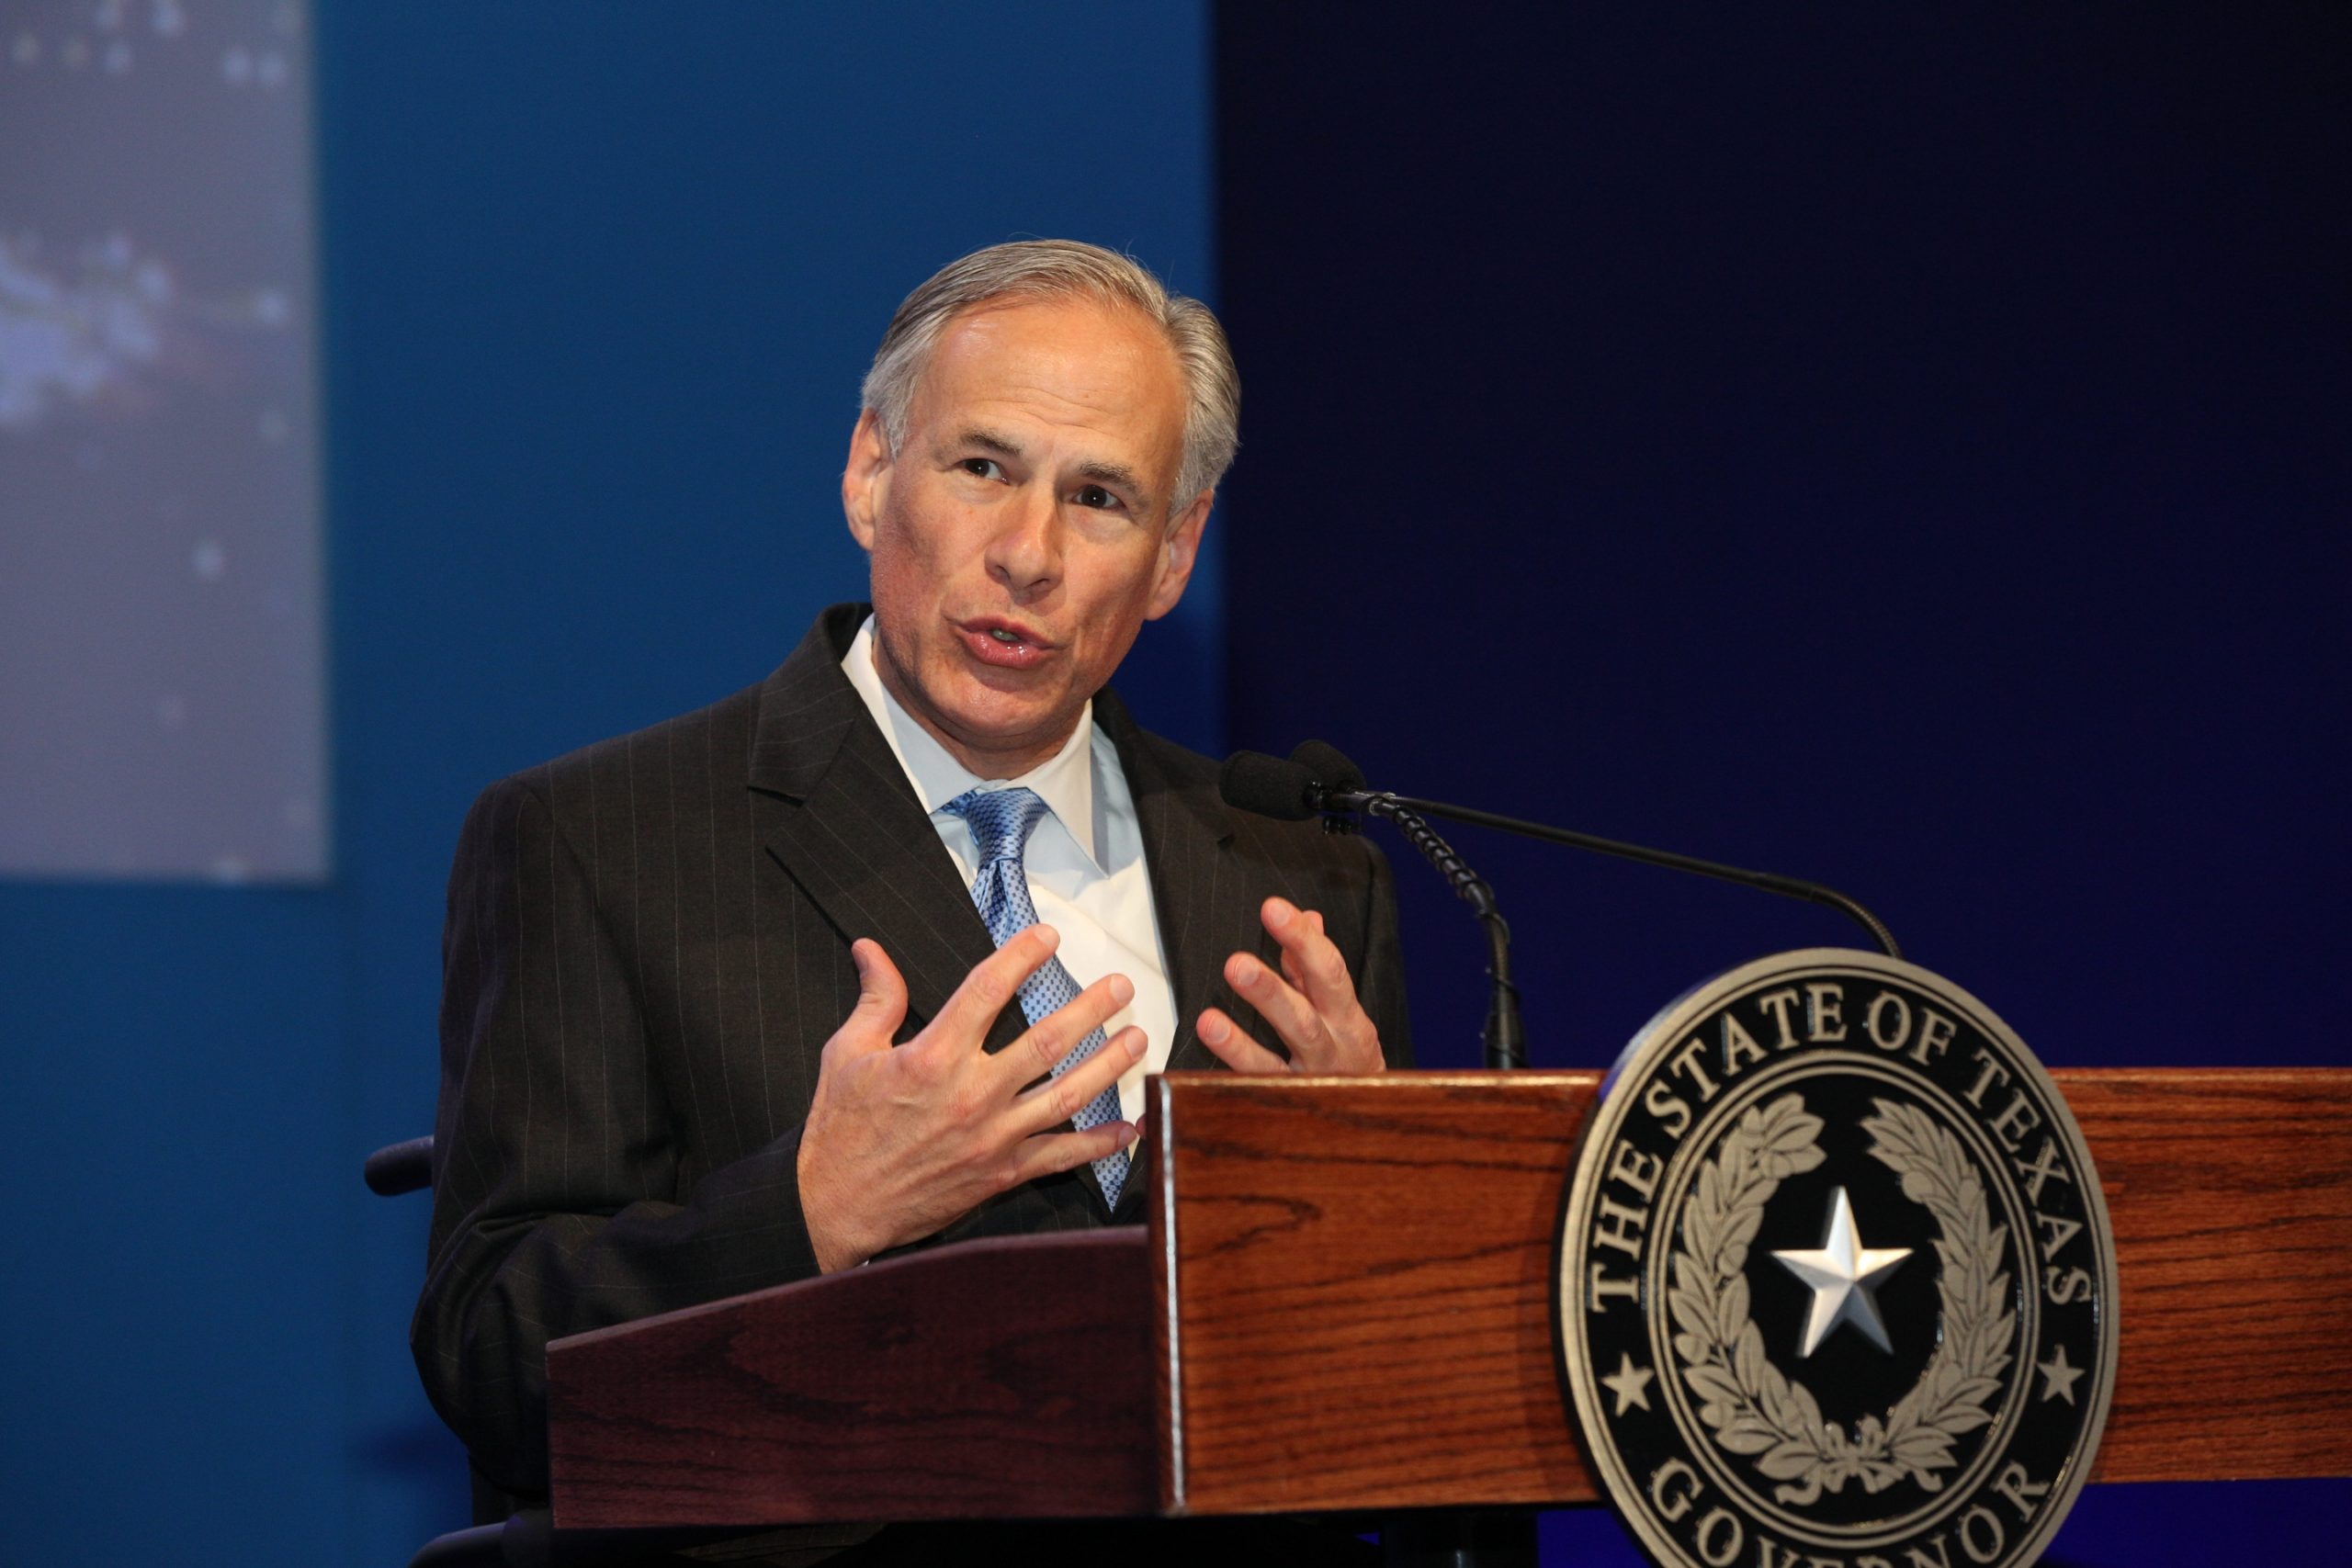 man holds both hands close to chest while speaking behind lectern bearing a texas seal